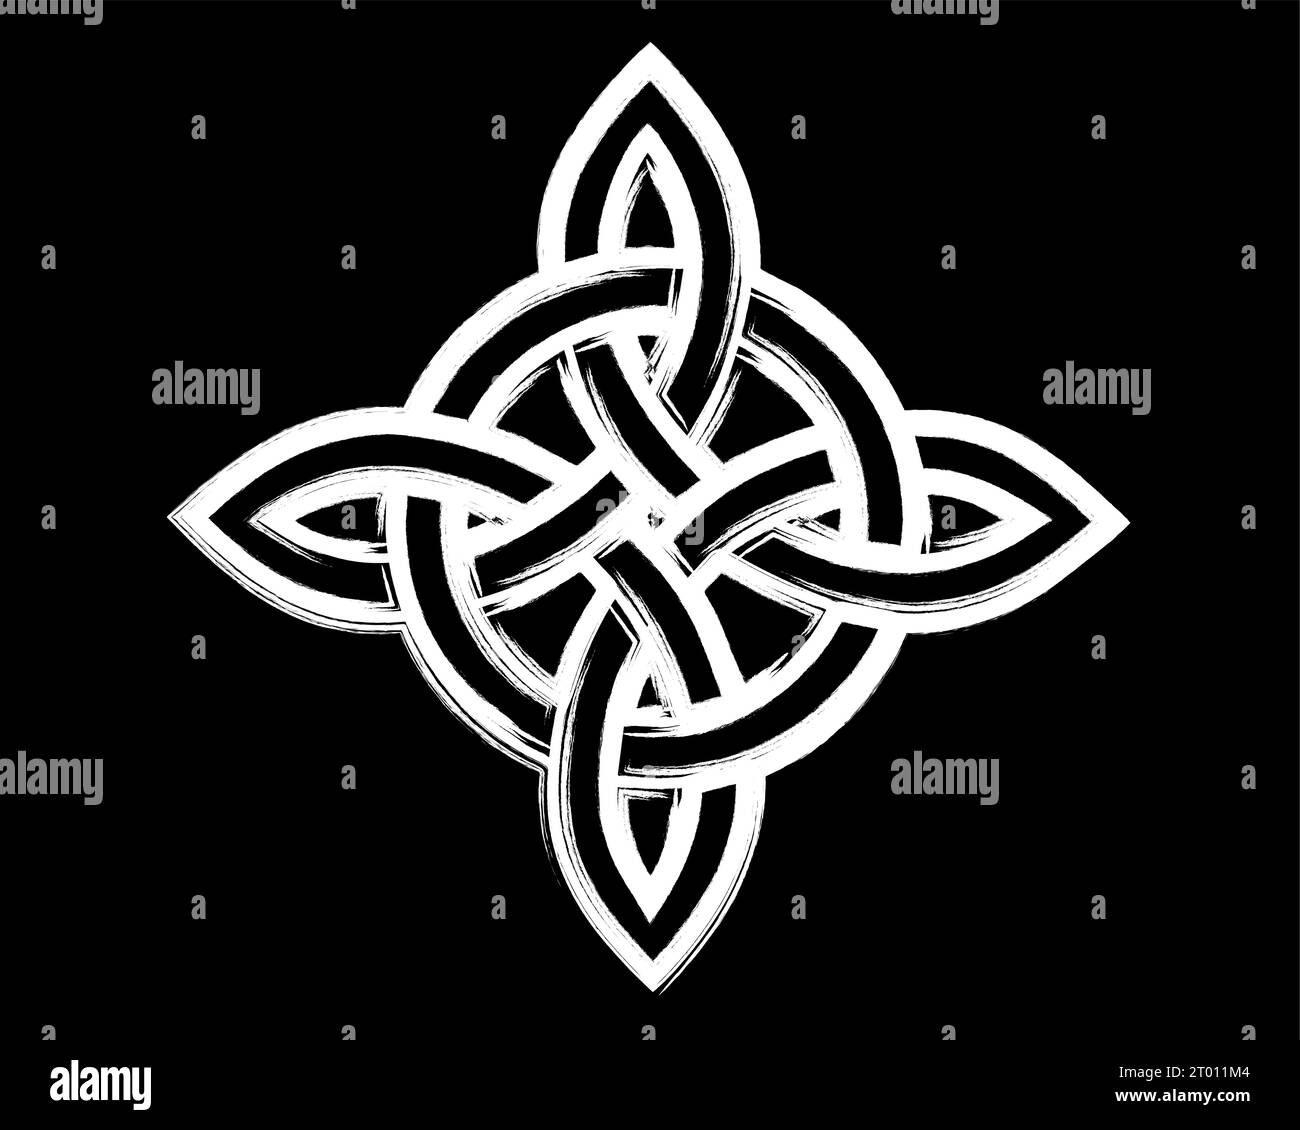 The Witch's Knot, Wicca symbol, Power of four elements, paint brush stroke style, white grunge celtic cross vector graphic design isolated on black Stock Vector